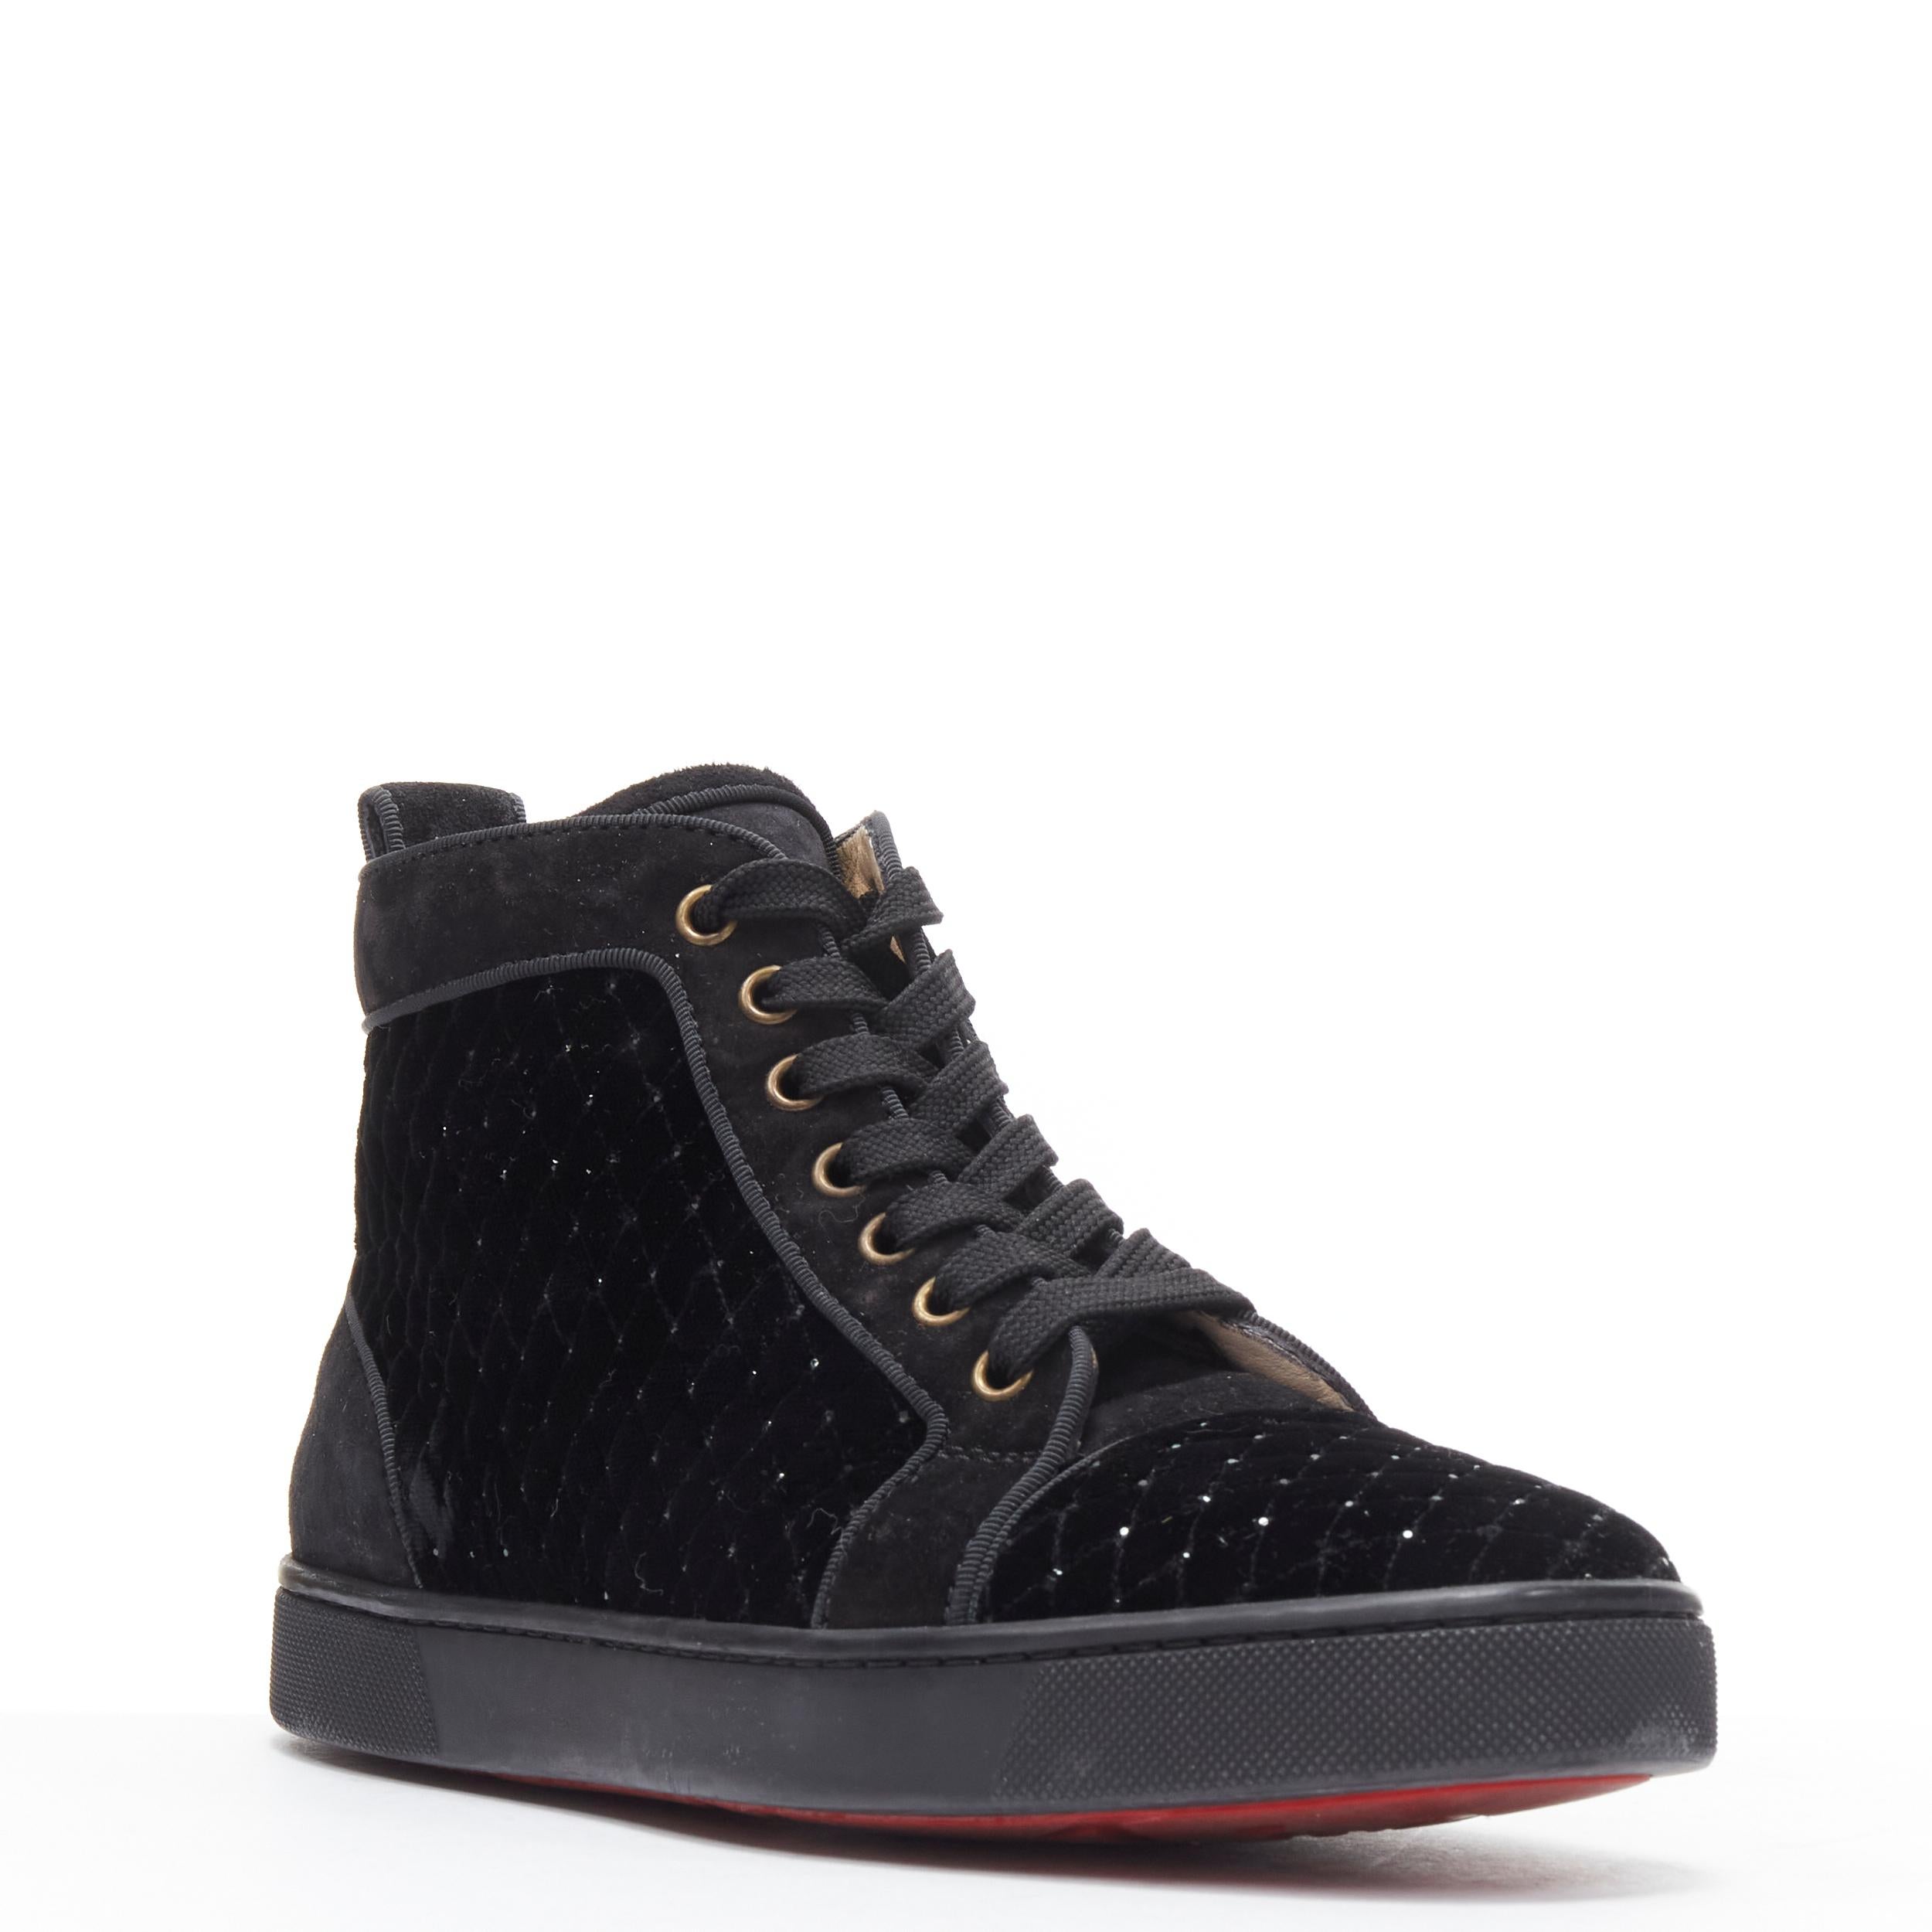 CHRISTIAN LOUBOUTIN Louis Orlato black suede velvet strass high top EU39.5 
Reference: TGAS/B01808 
Brand: Christian Louboutin 
Designer: Christian Louboutin 
Model: Louis Orlato 
Material: Velvet 
Color: Black 
Pattern: Solid 
Closure: Lace Up